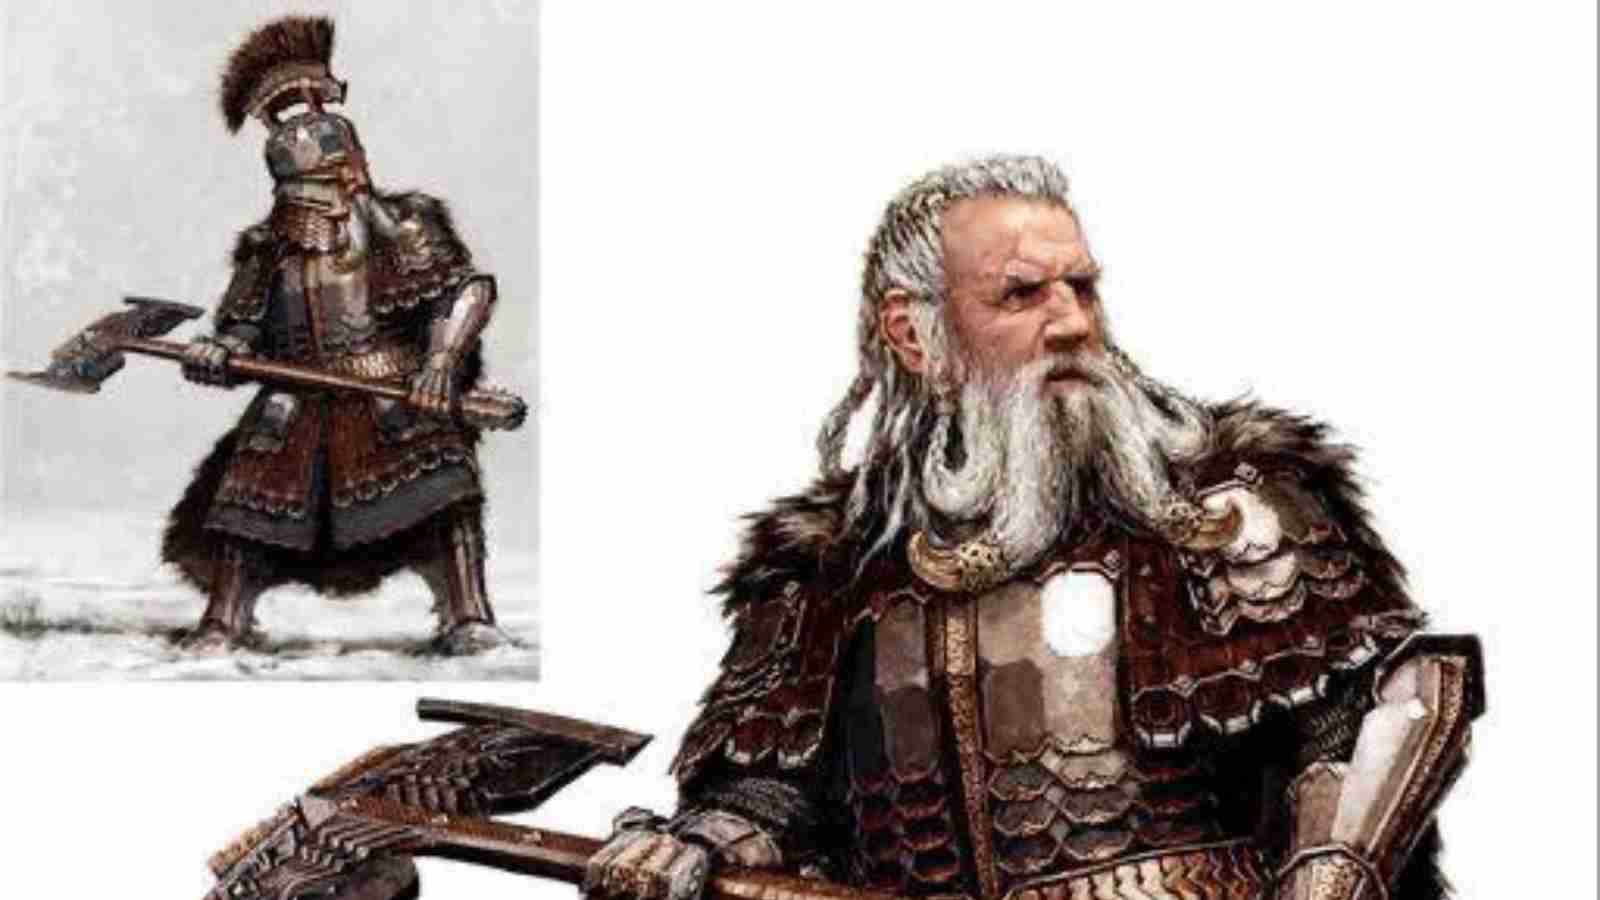 Why is Thorin III Stonehelm one of the top 10 most powerful dwarves of the Middle Earth?